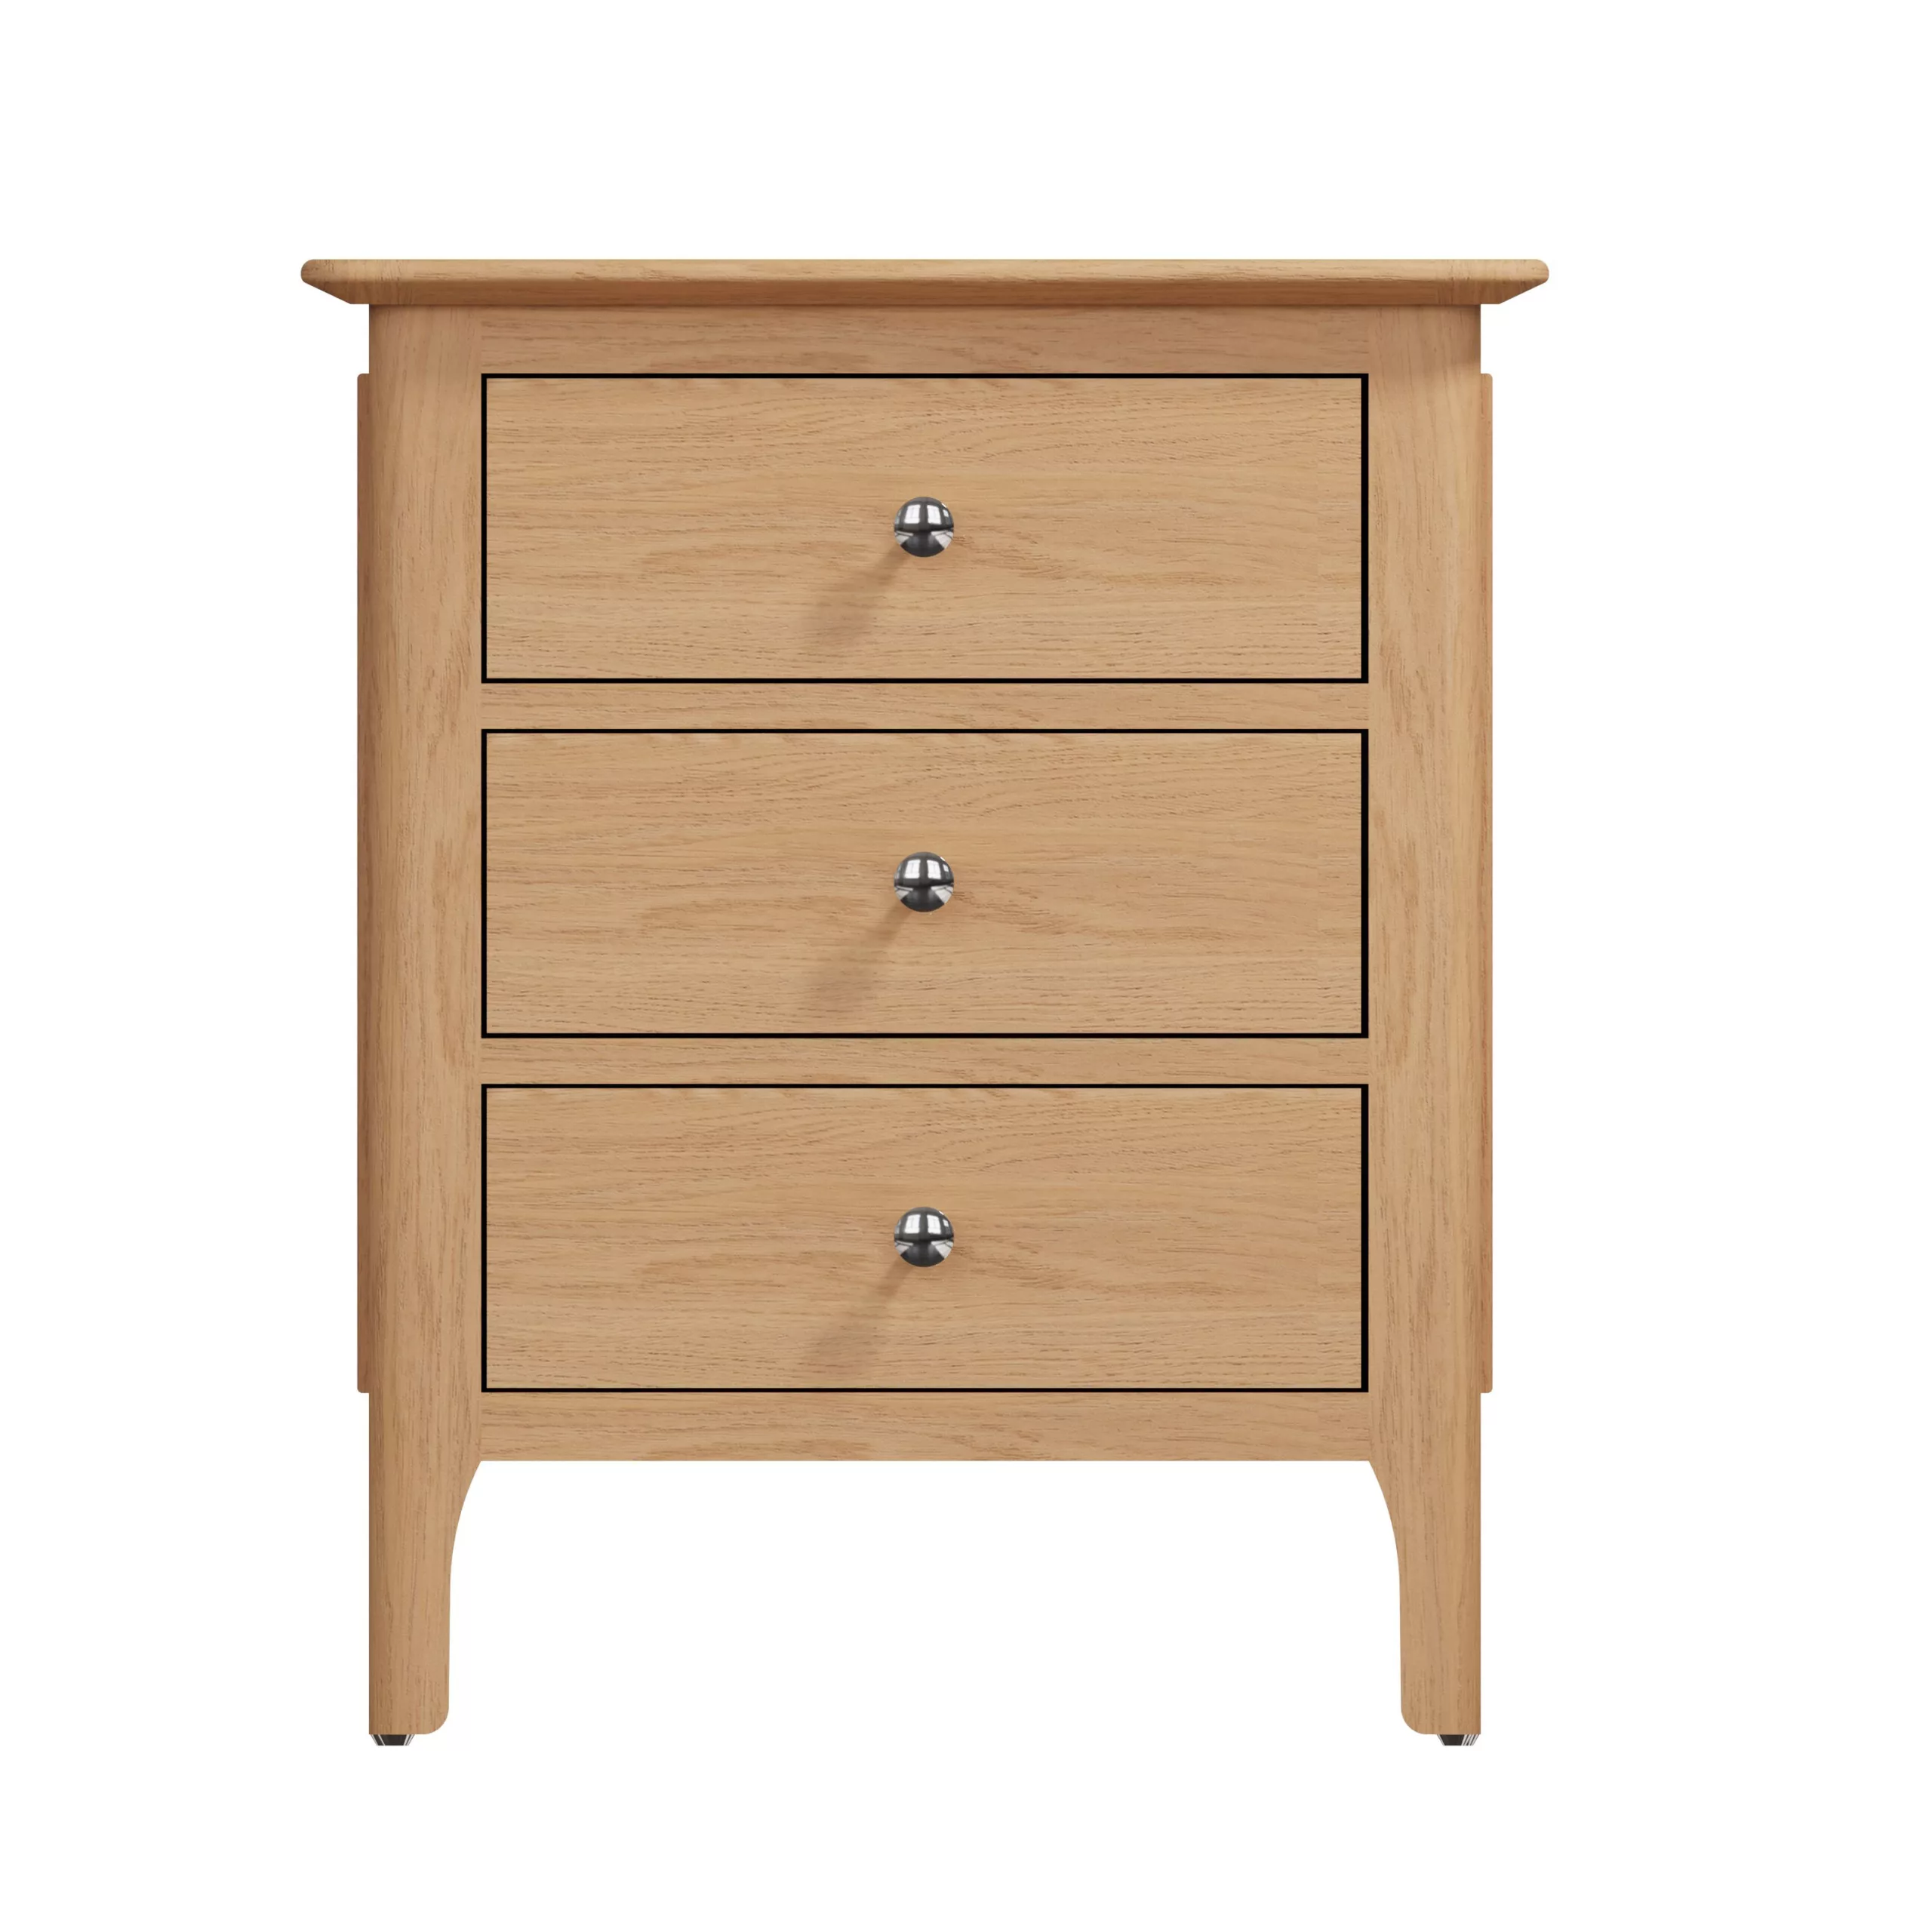 Woodley Extra Large Bedside Chest